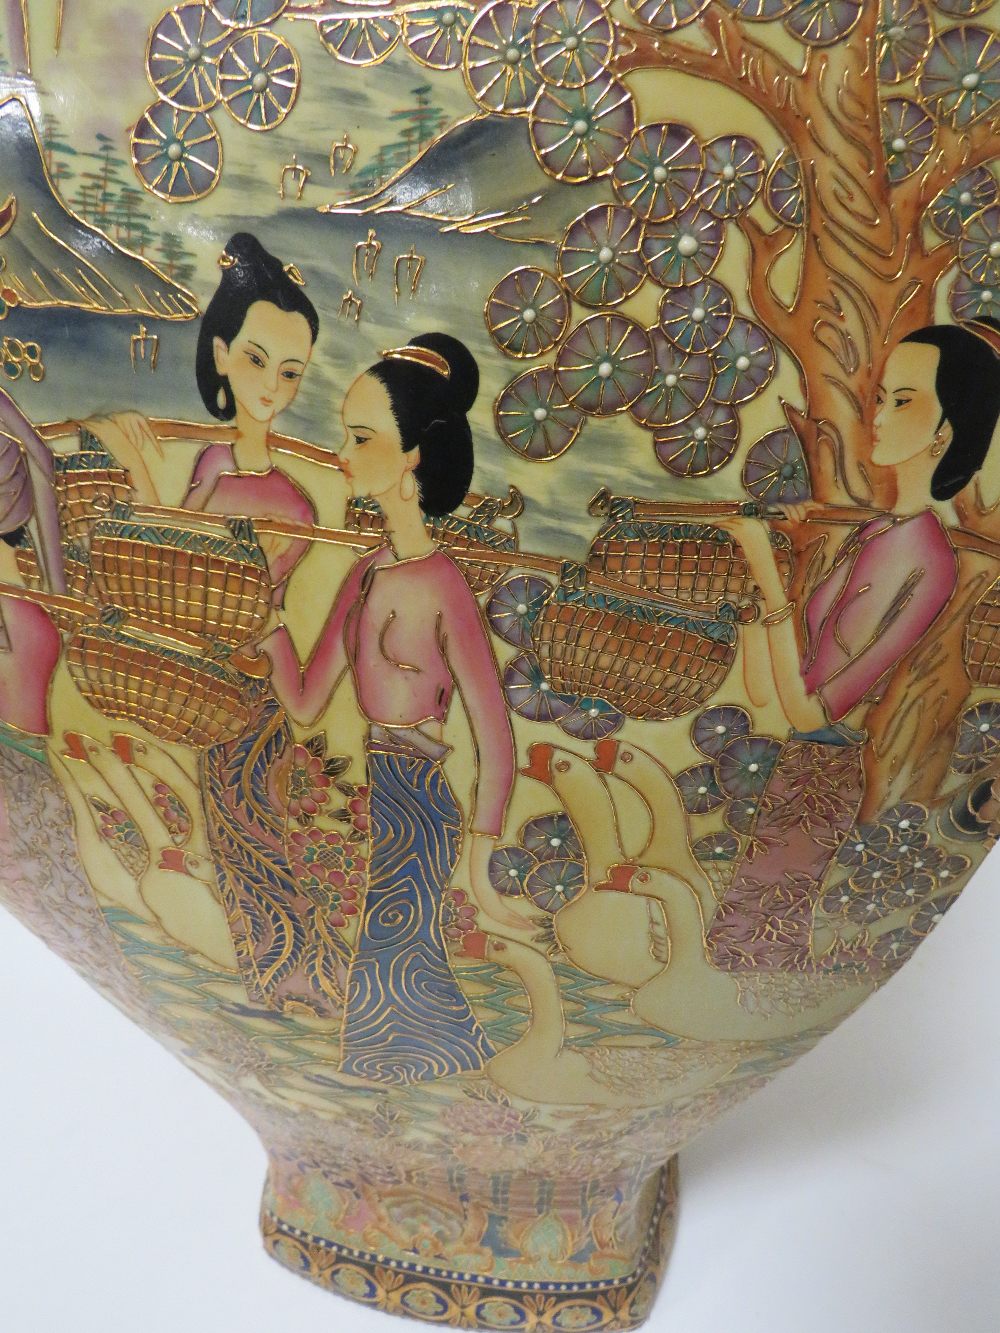 A LARGE DECORATIVE ORIENTAL VASE TOGETHER WITH A PAIR OF BINOCULARS - Image 7 of 8